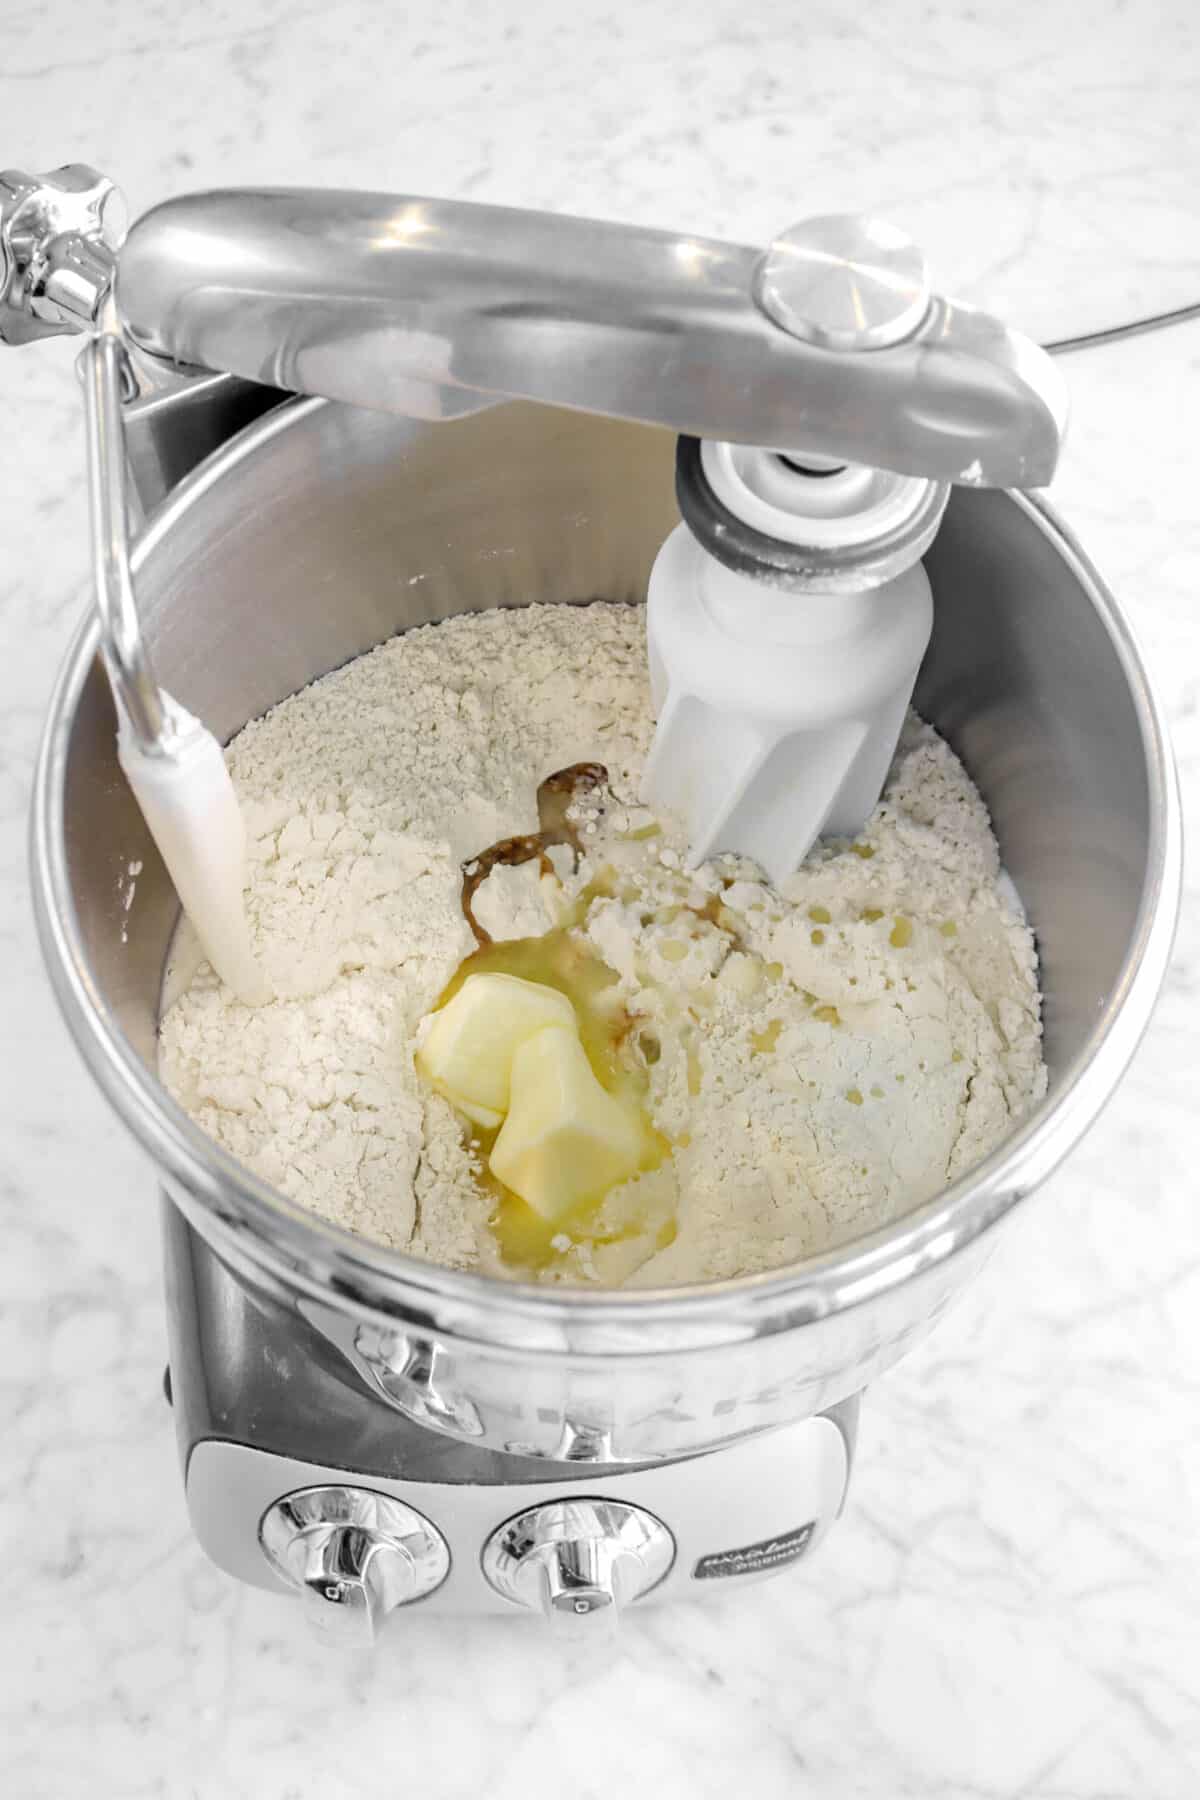 butter, eggs, and vanilla added to dry ingredients